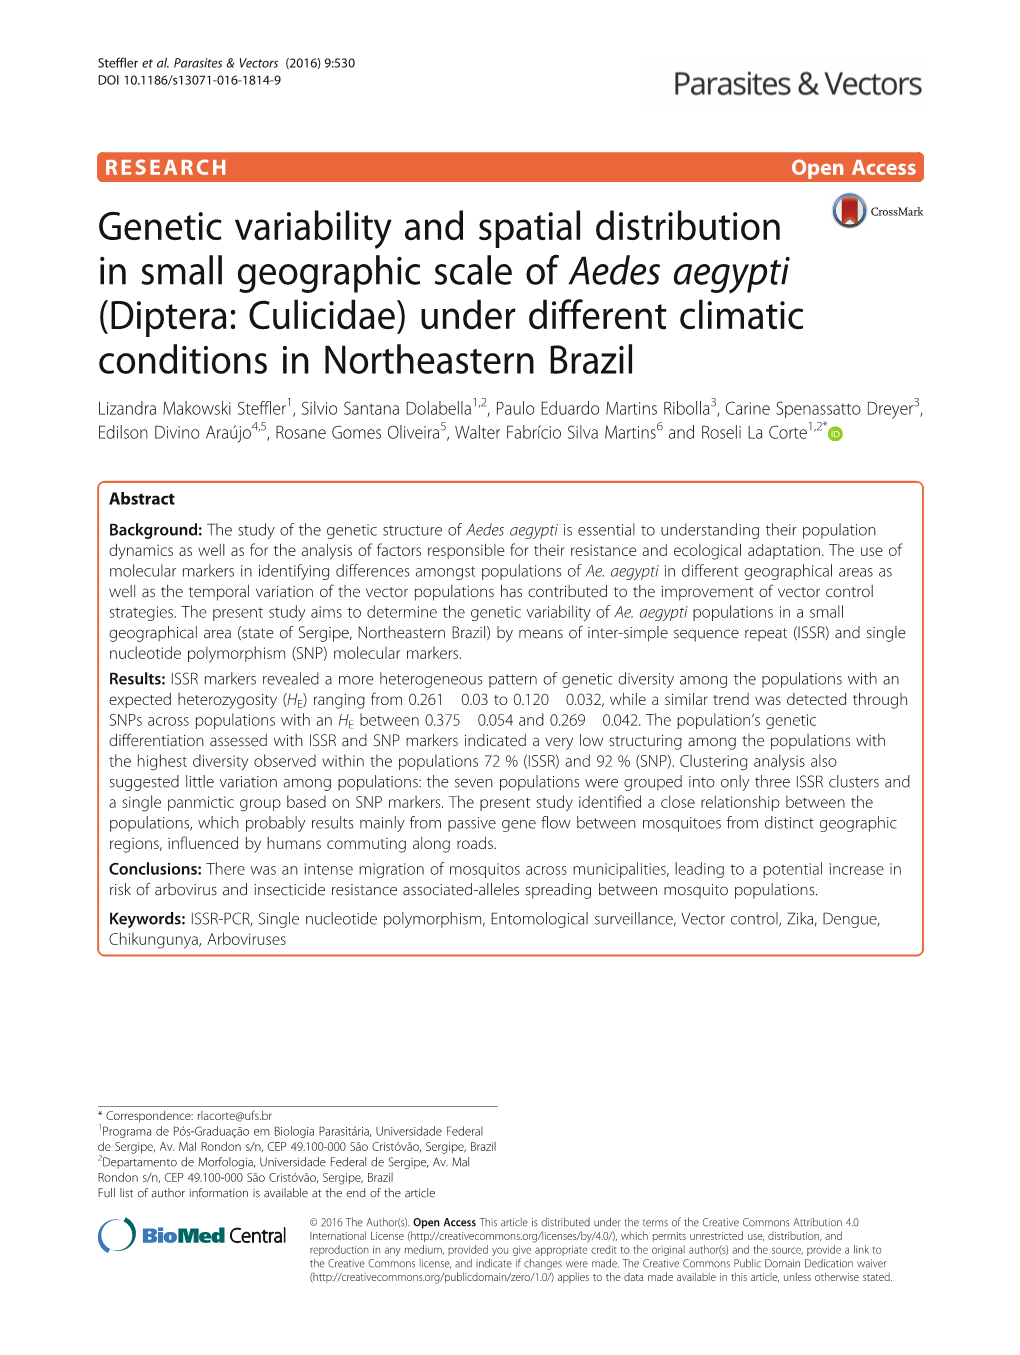 Genetic Variability and Spatial Distribution in Small